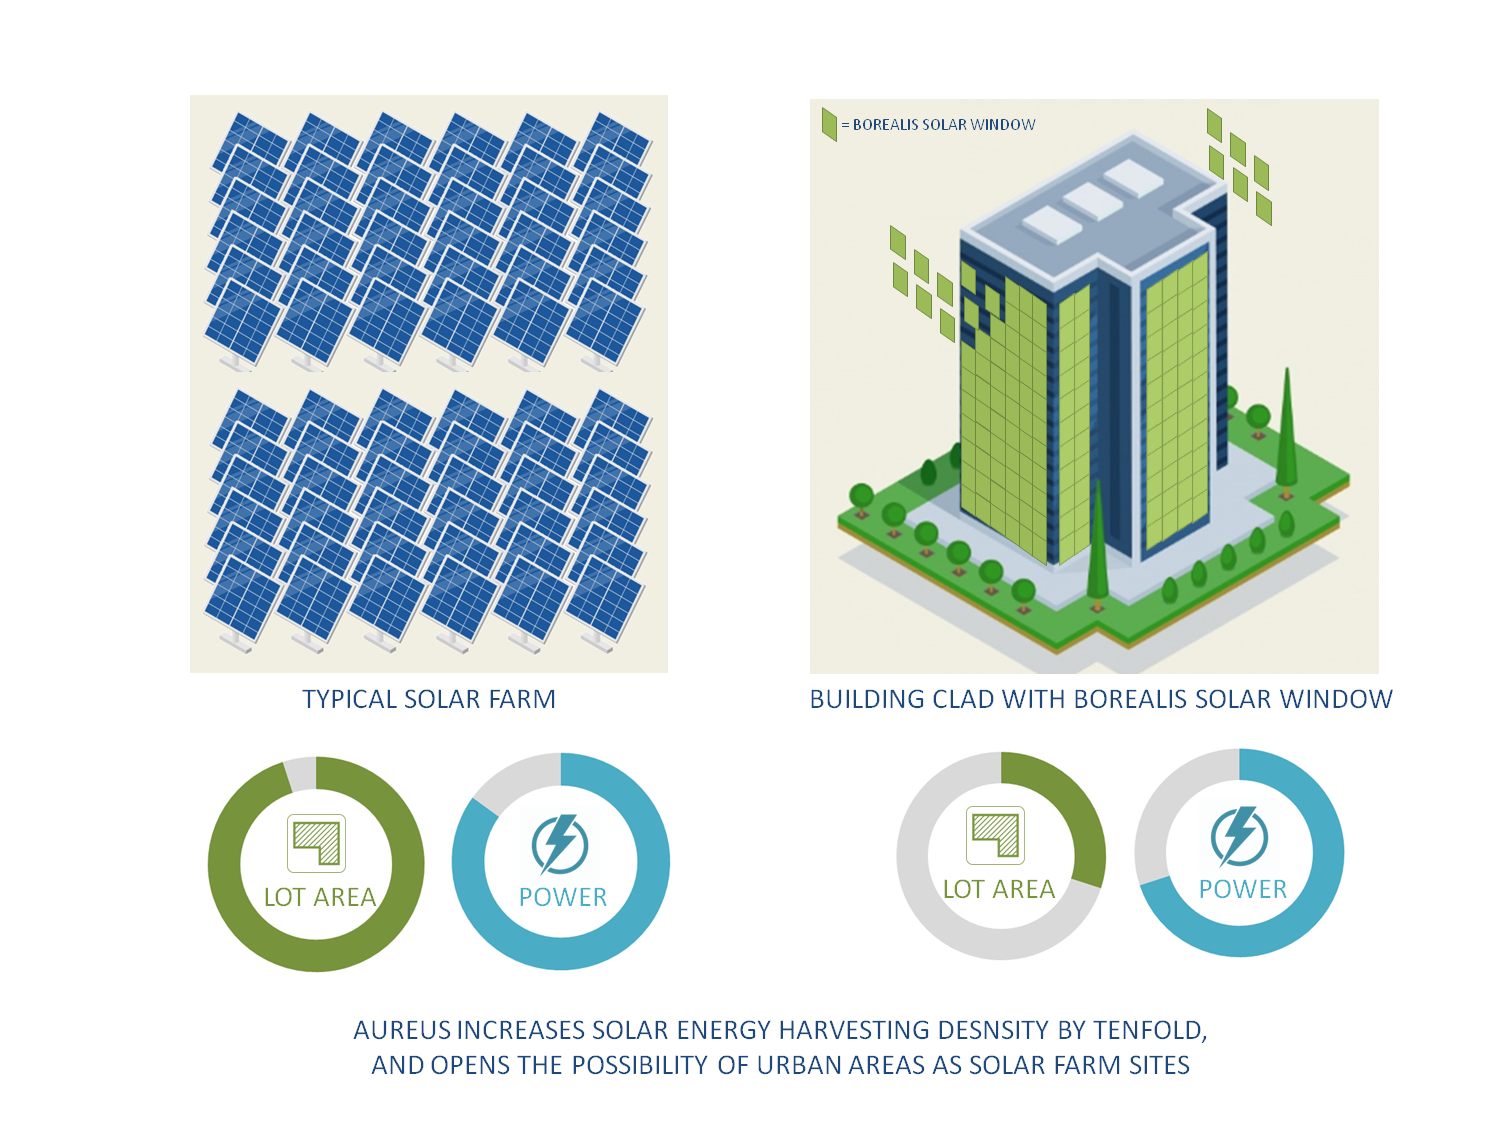 Solar Farms are built horizontally and never vertically, until now. Since AuREUS captures UV, it can produce electricity even when not facing the sun. Buildings clad on all sides with AuREUS become vertical solar farms.